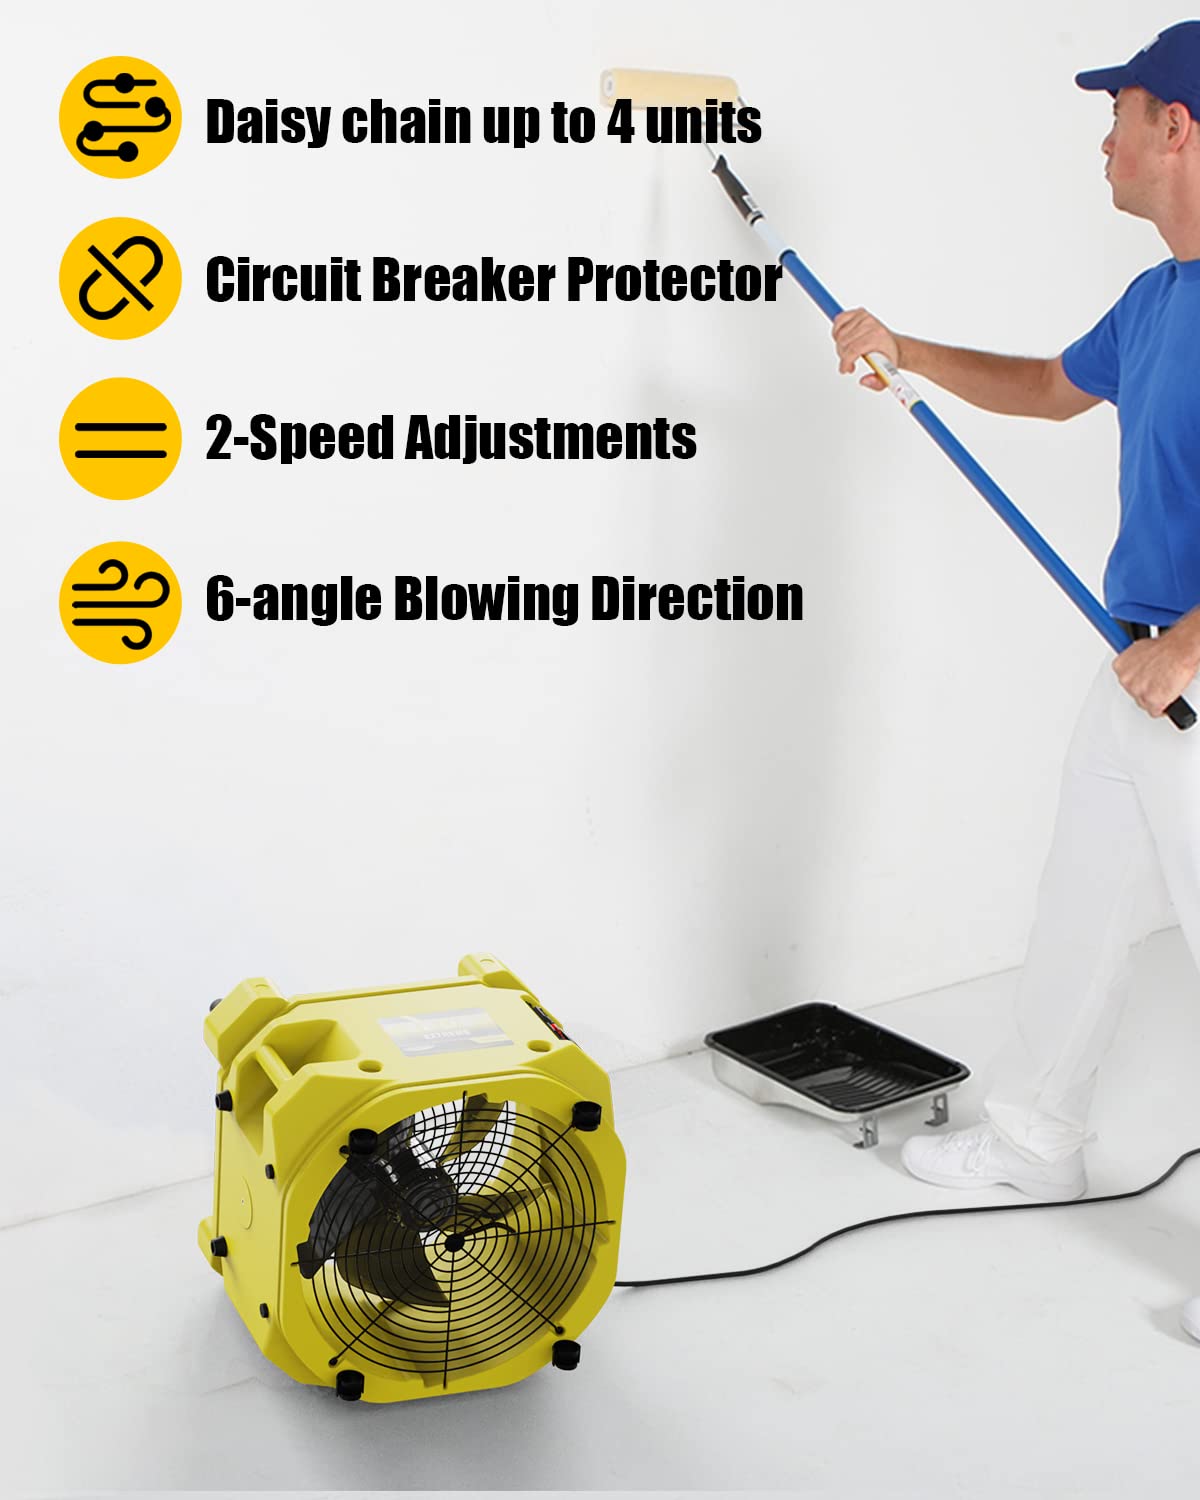 AlorAir Zeus Extreme Axial Fan High-velocity Air Mover 3000CFM with Hour Meter, Variable Speed, Circuit Breaker Protection